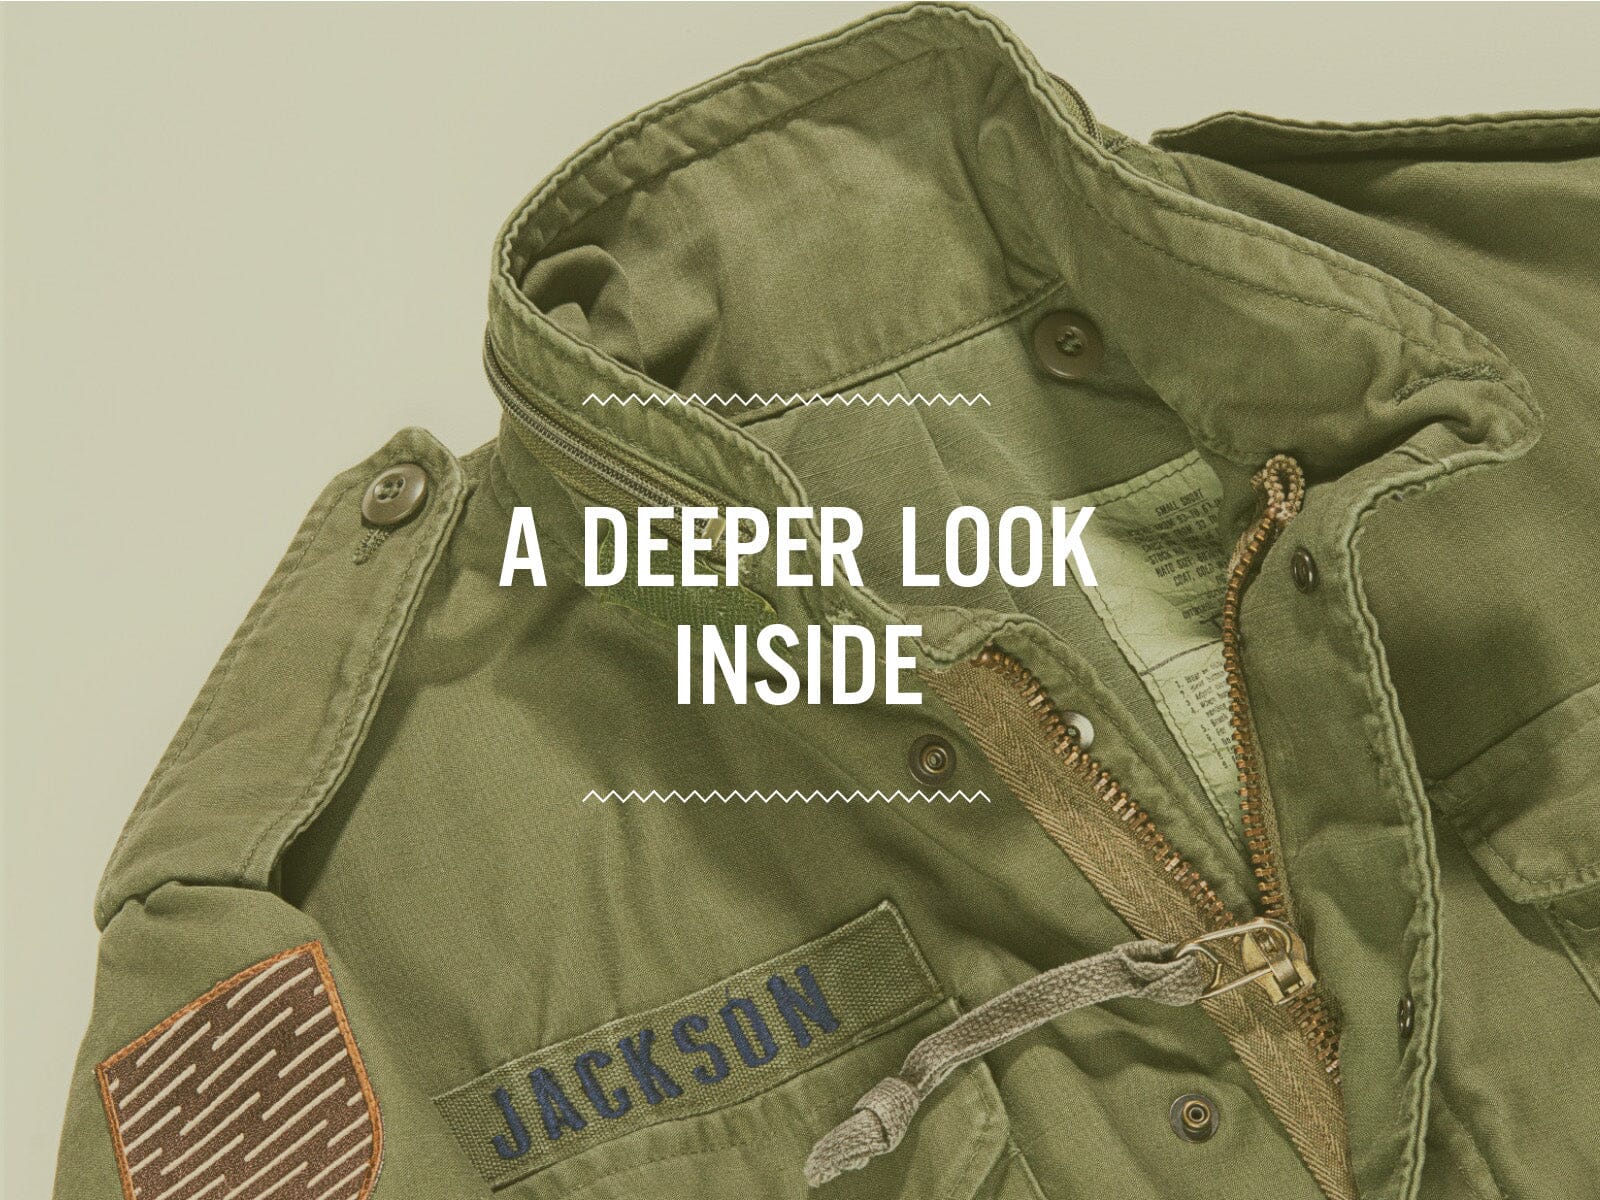 The M-65 Field Jackets